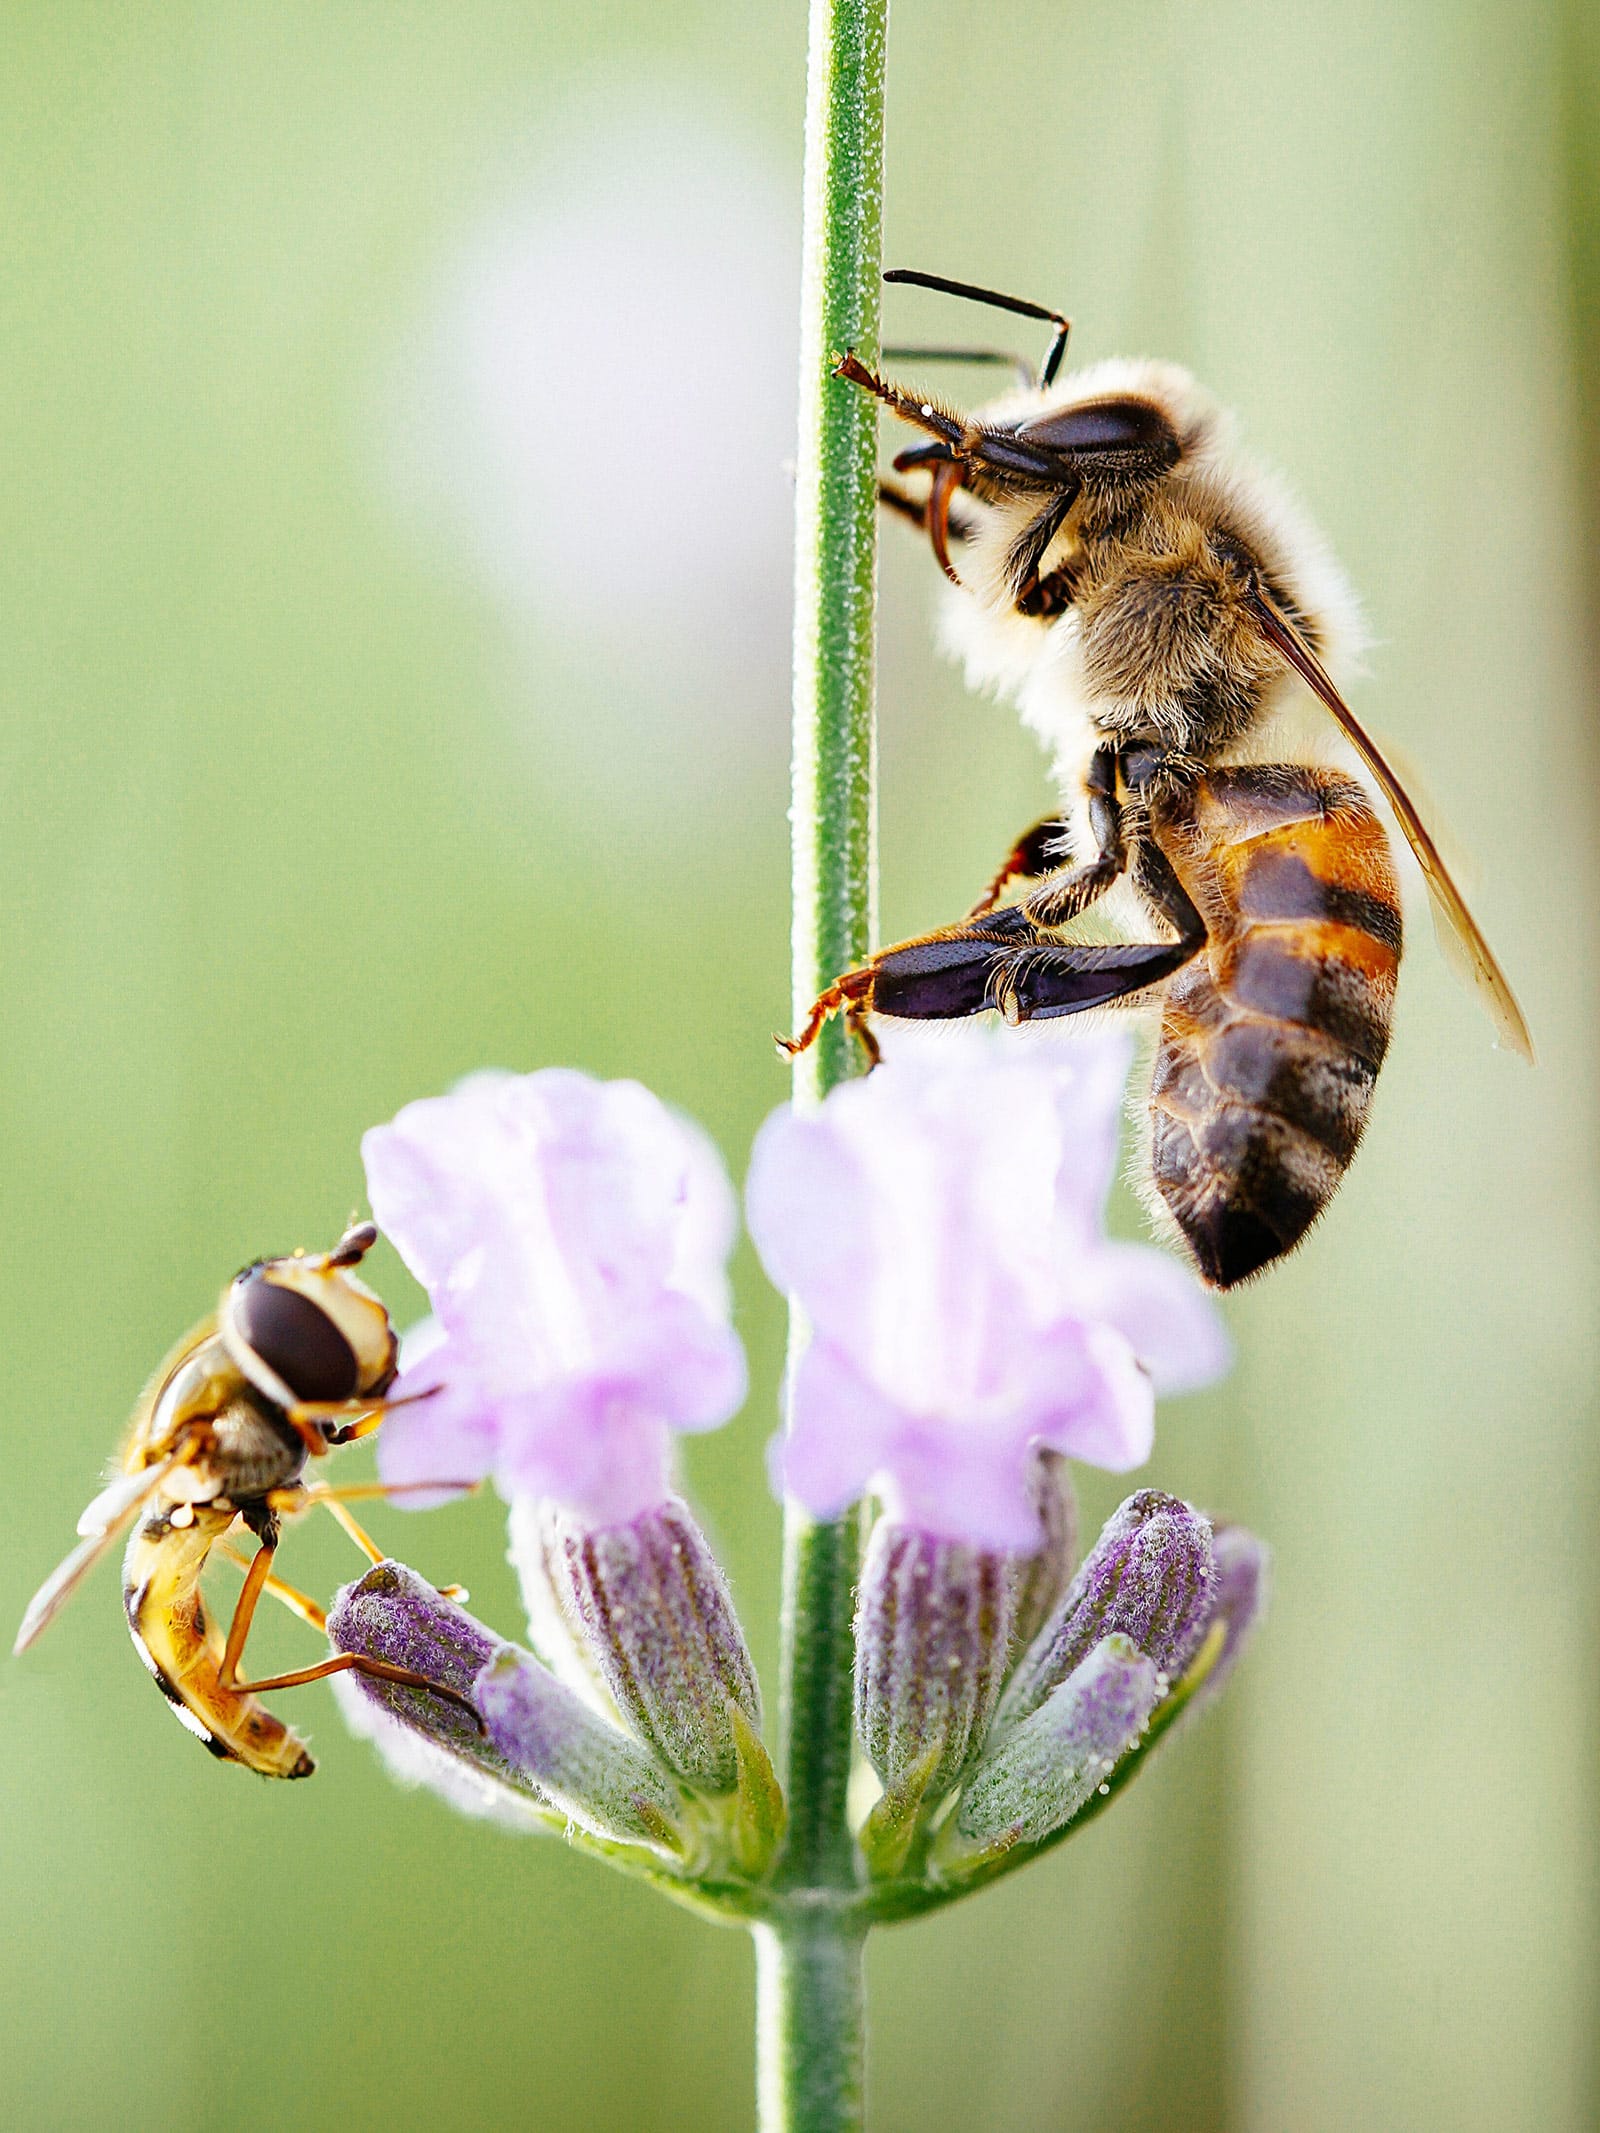 Stem with small purple flowers, with a hoverfly on the left side and a bee on the right side